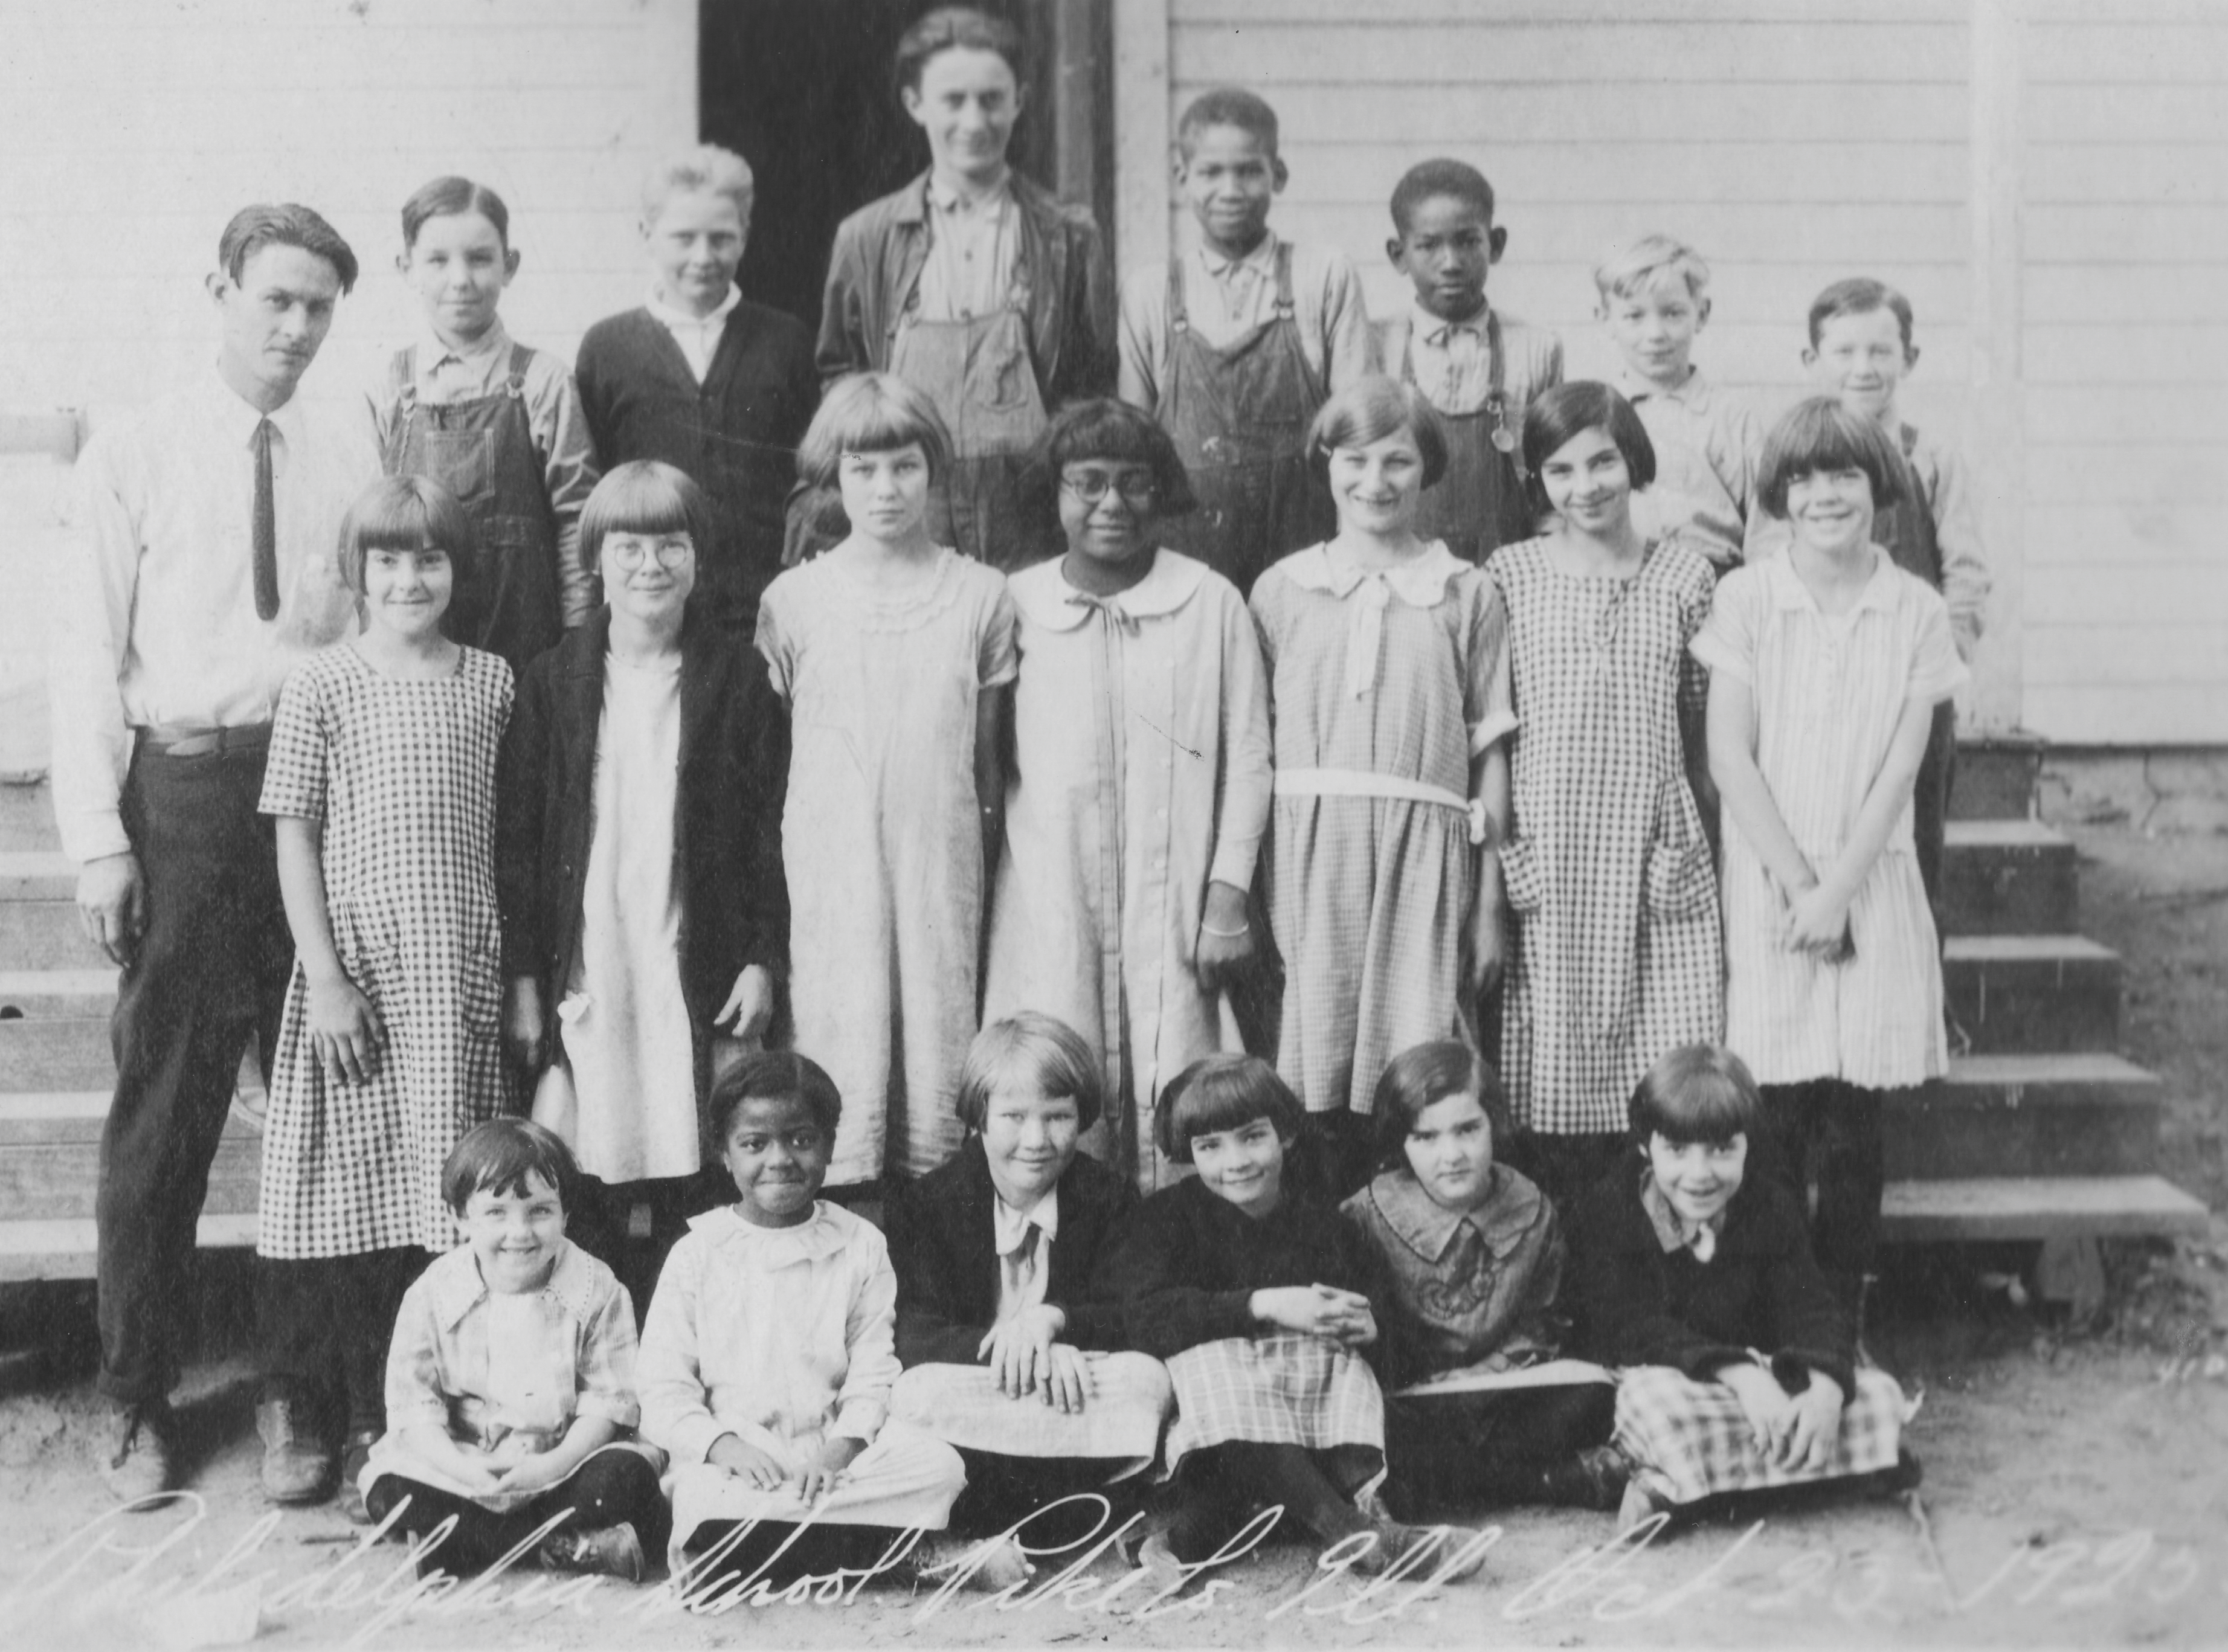 Twenty children of mixed ages and genders posing for the camera in front of a schoolhouse.